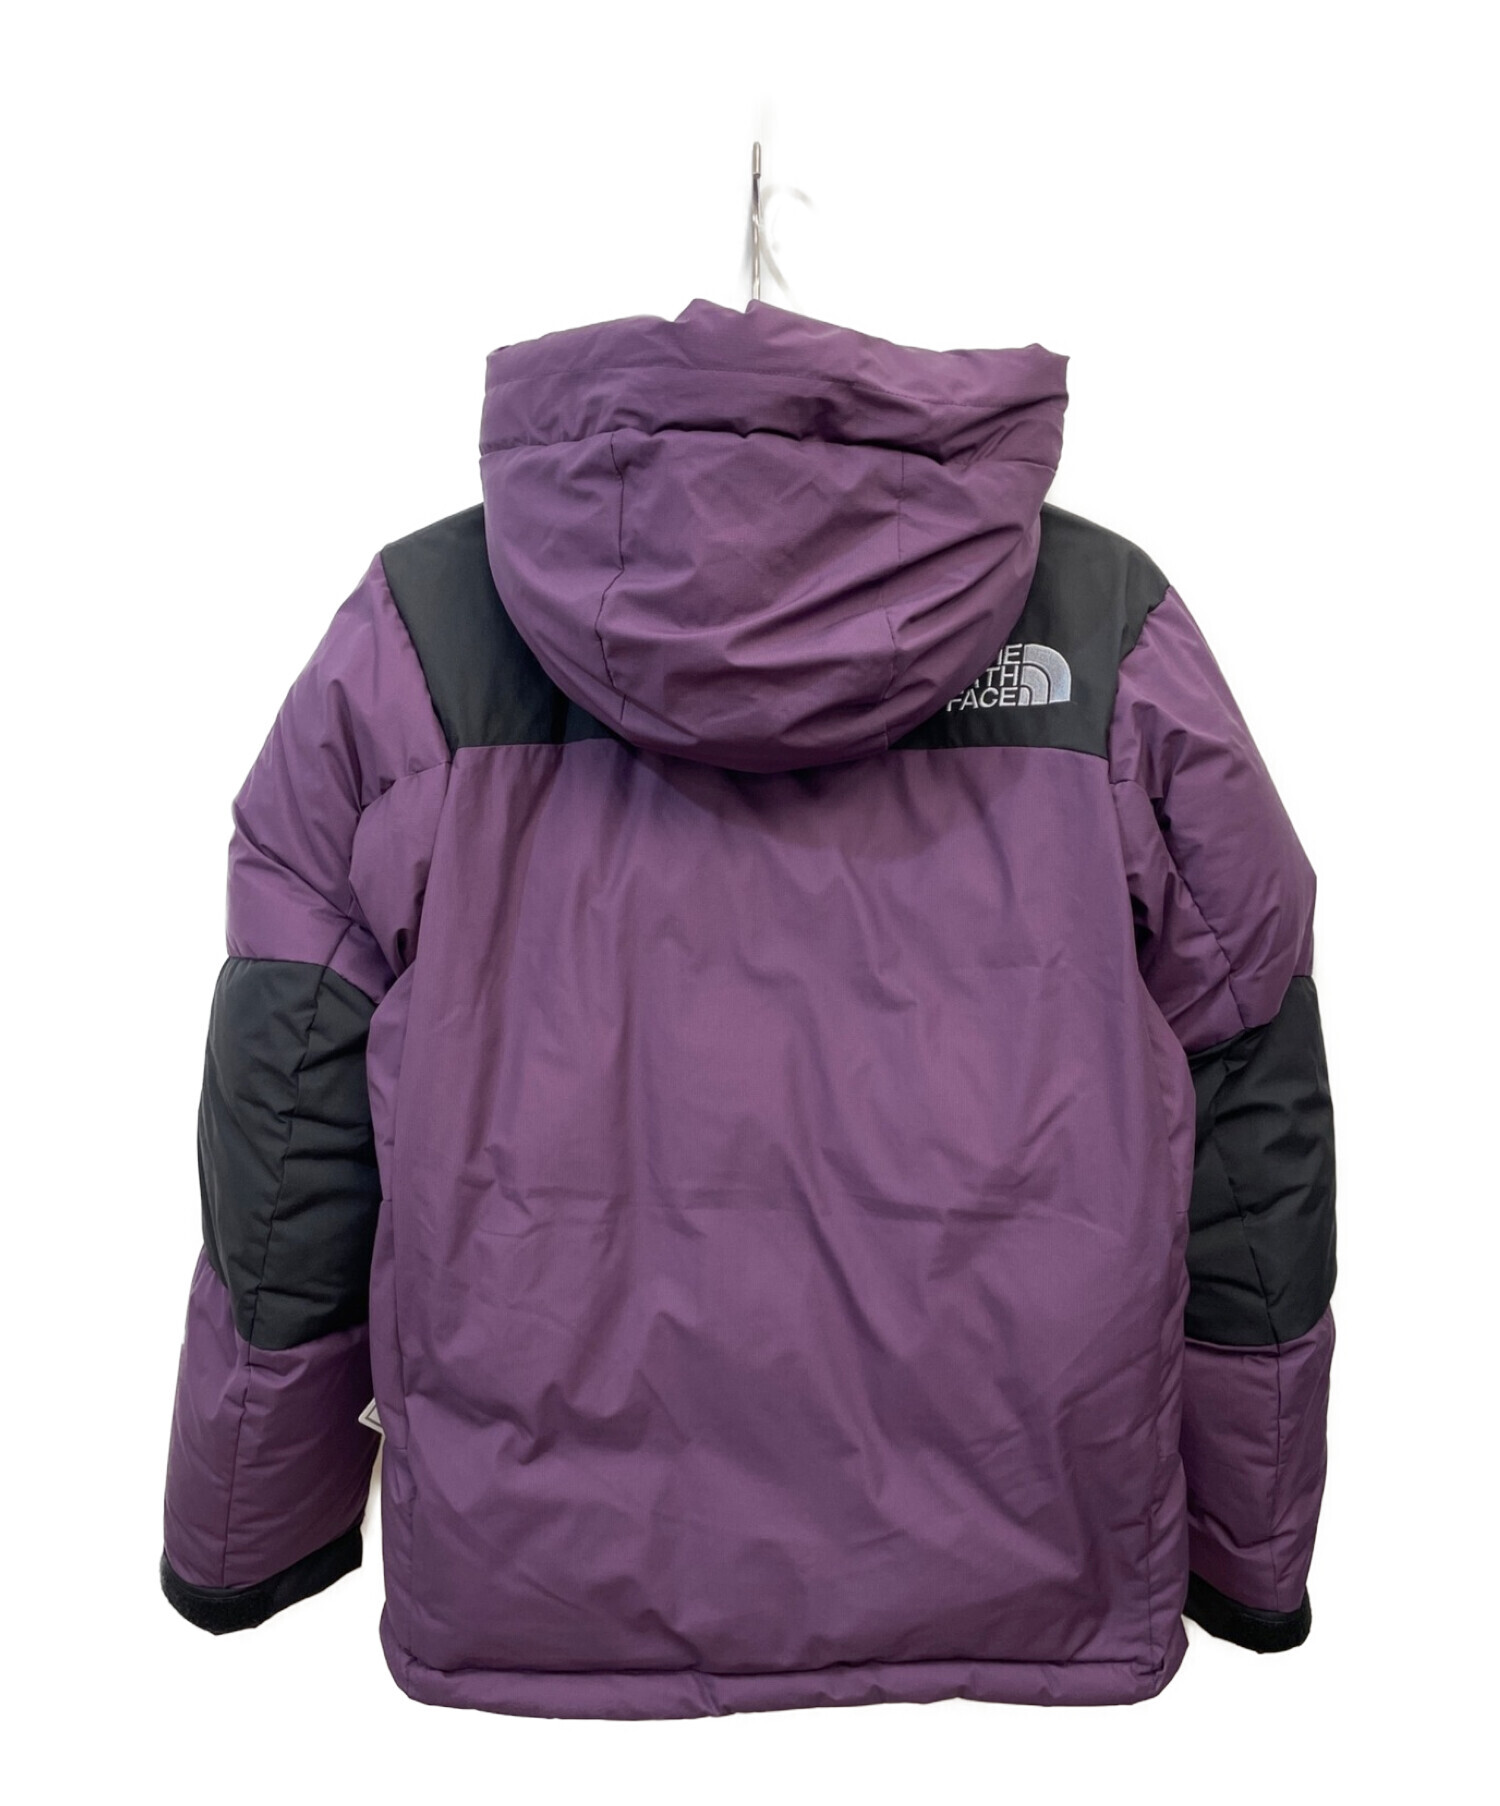 THE NORTH FACE◇BALTRO LIGHT JACKET_バルトロライトジャケット/L